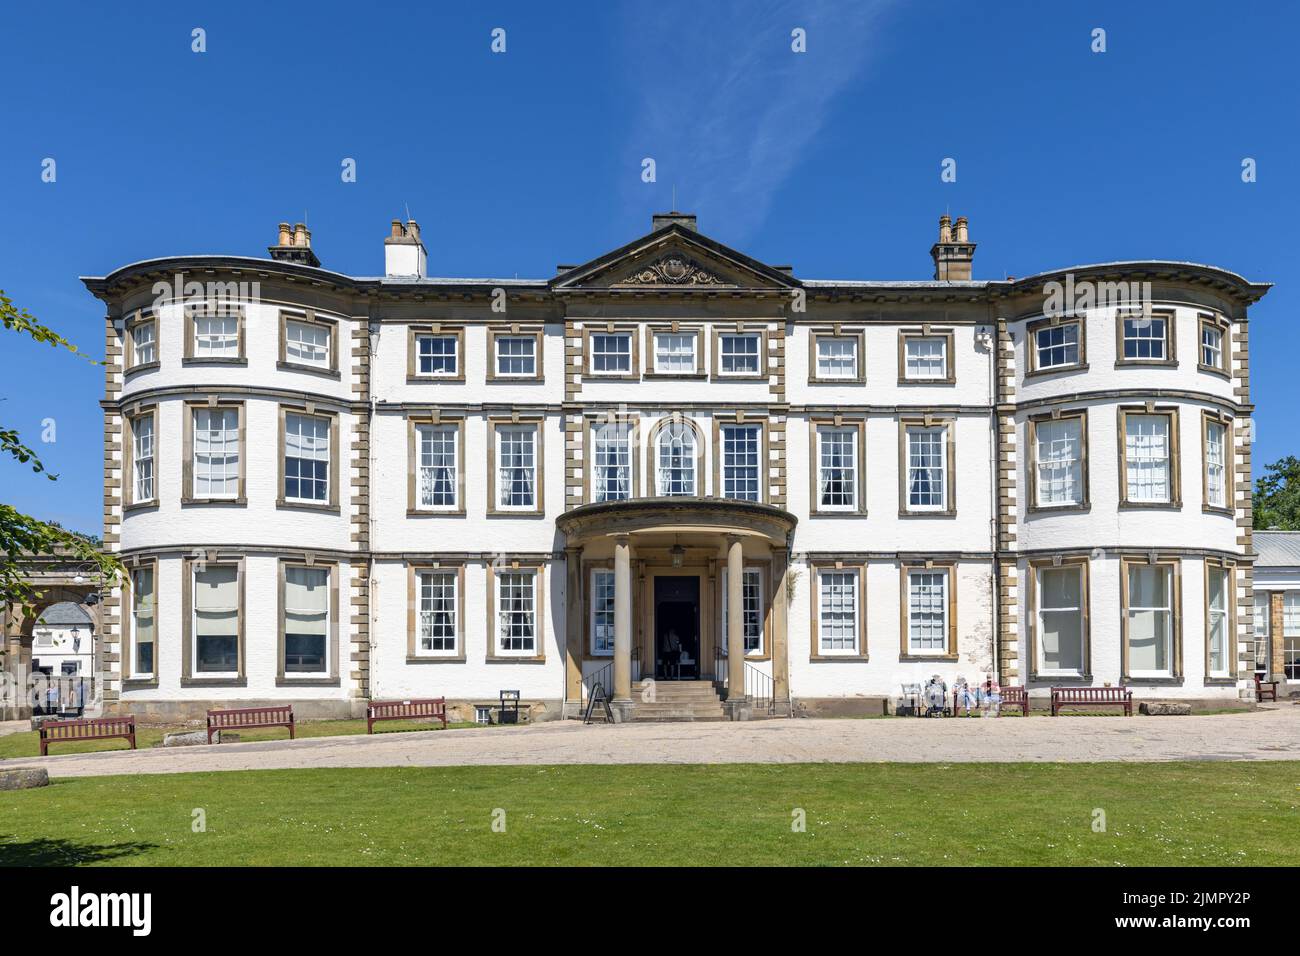 External view of the facade of Sewerby Hall, a Georgian country house near Bridlington, East Yorkshire, England, Uk Stock Photo